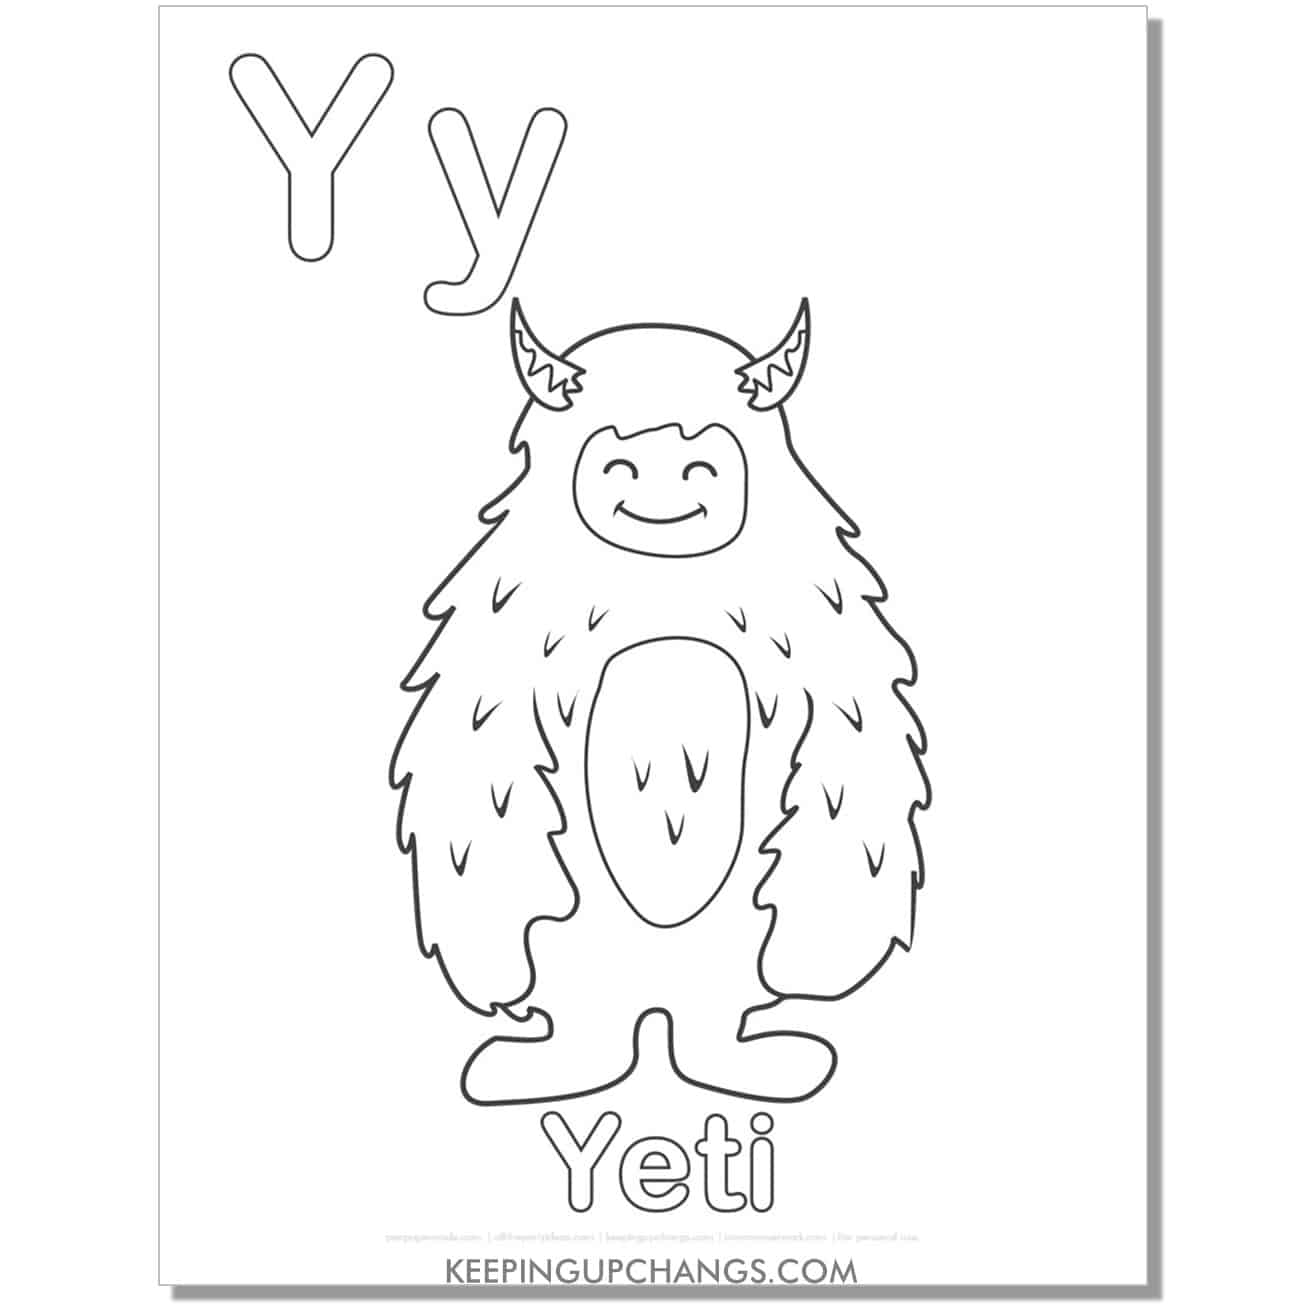 abc coloring sheet, y for yeti.